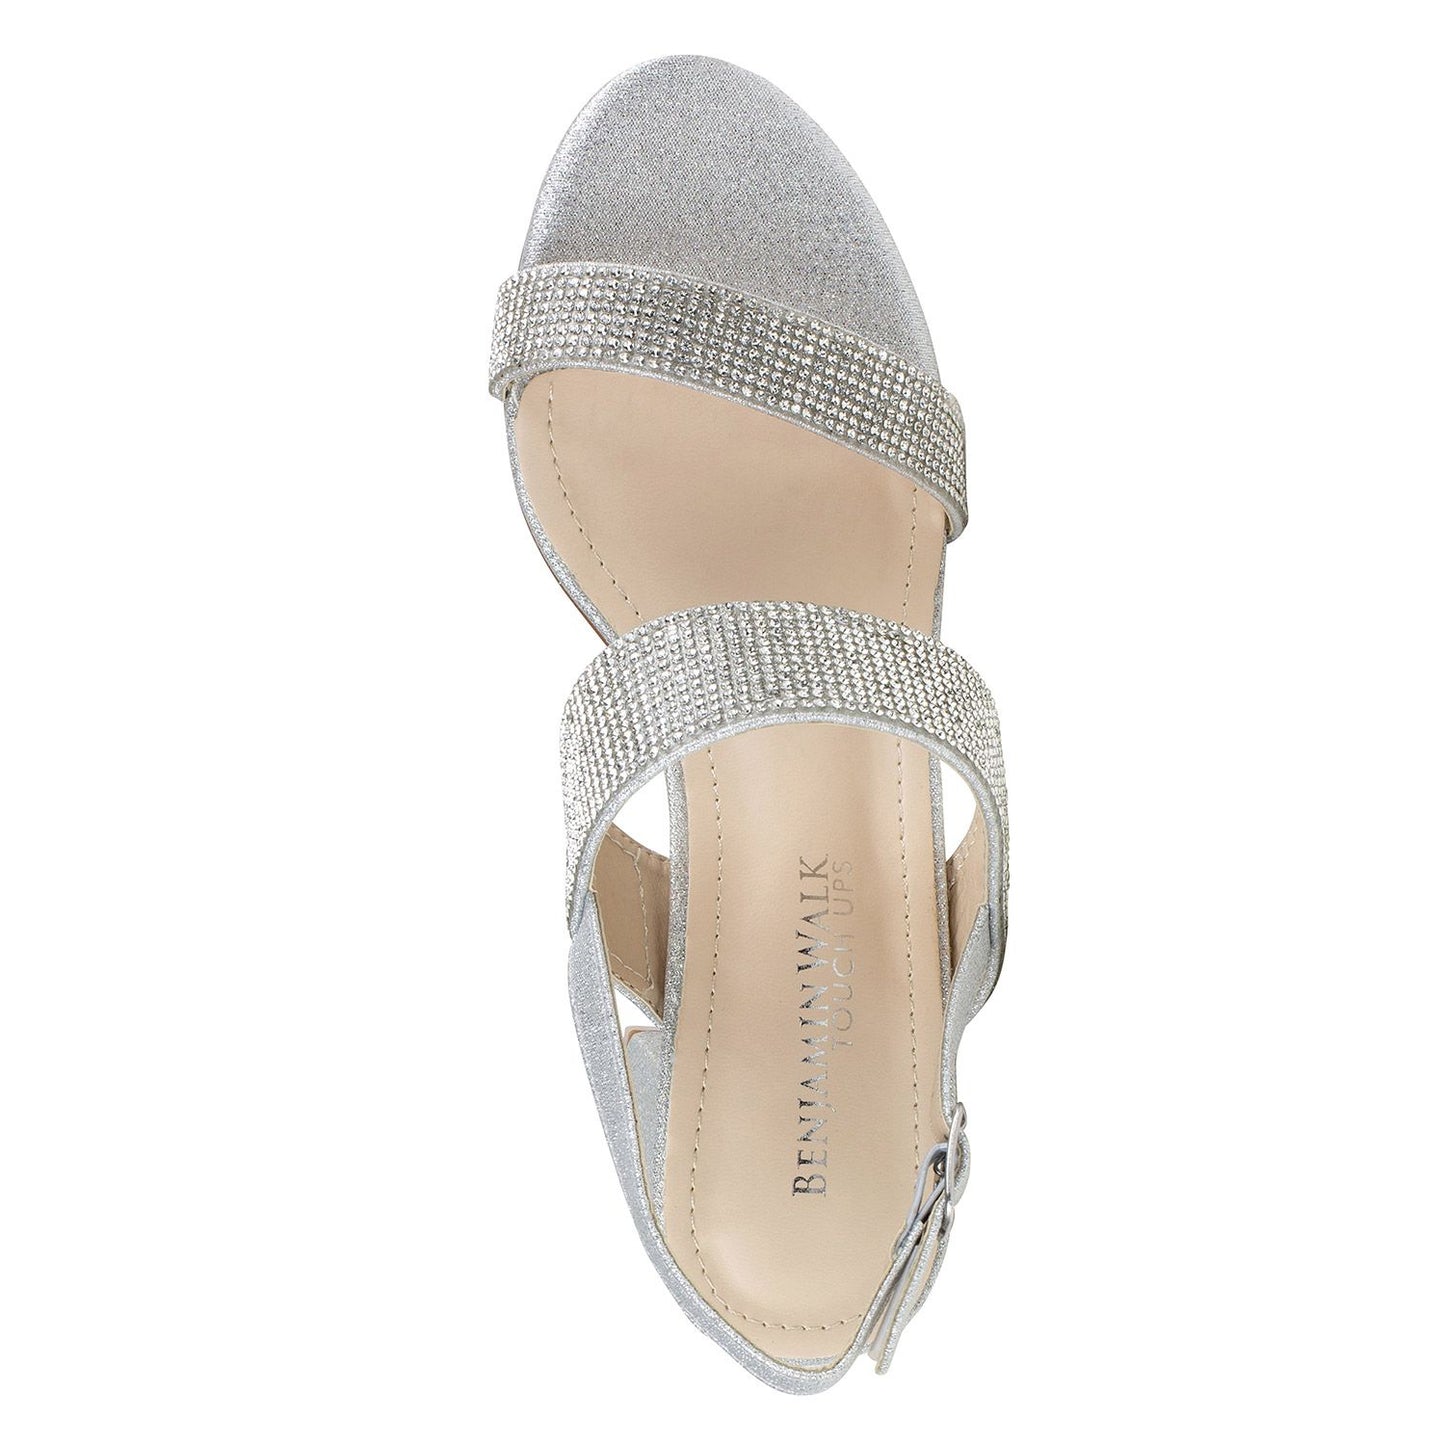 TOP VIEW OF SILVER GLITTER SHOE WITH WIDE BANDS AND 2 INCH BLOCK HEEL